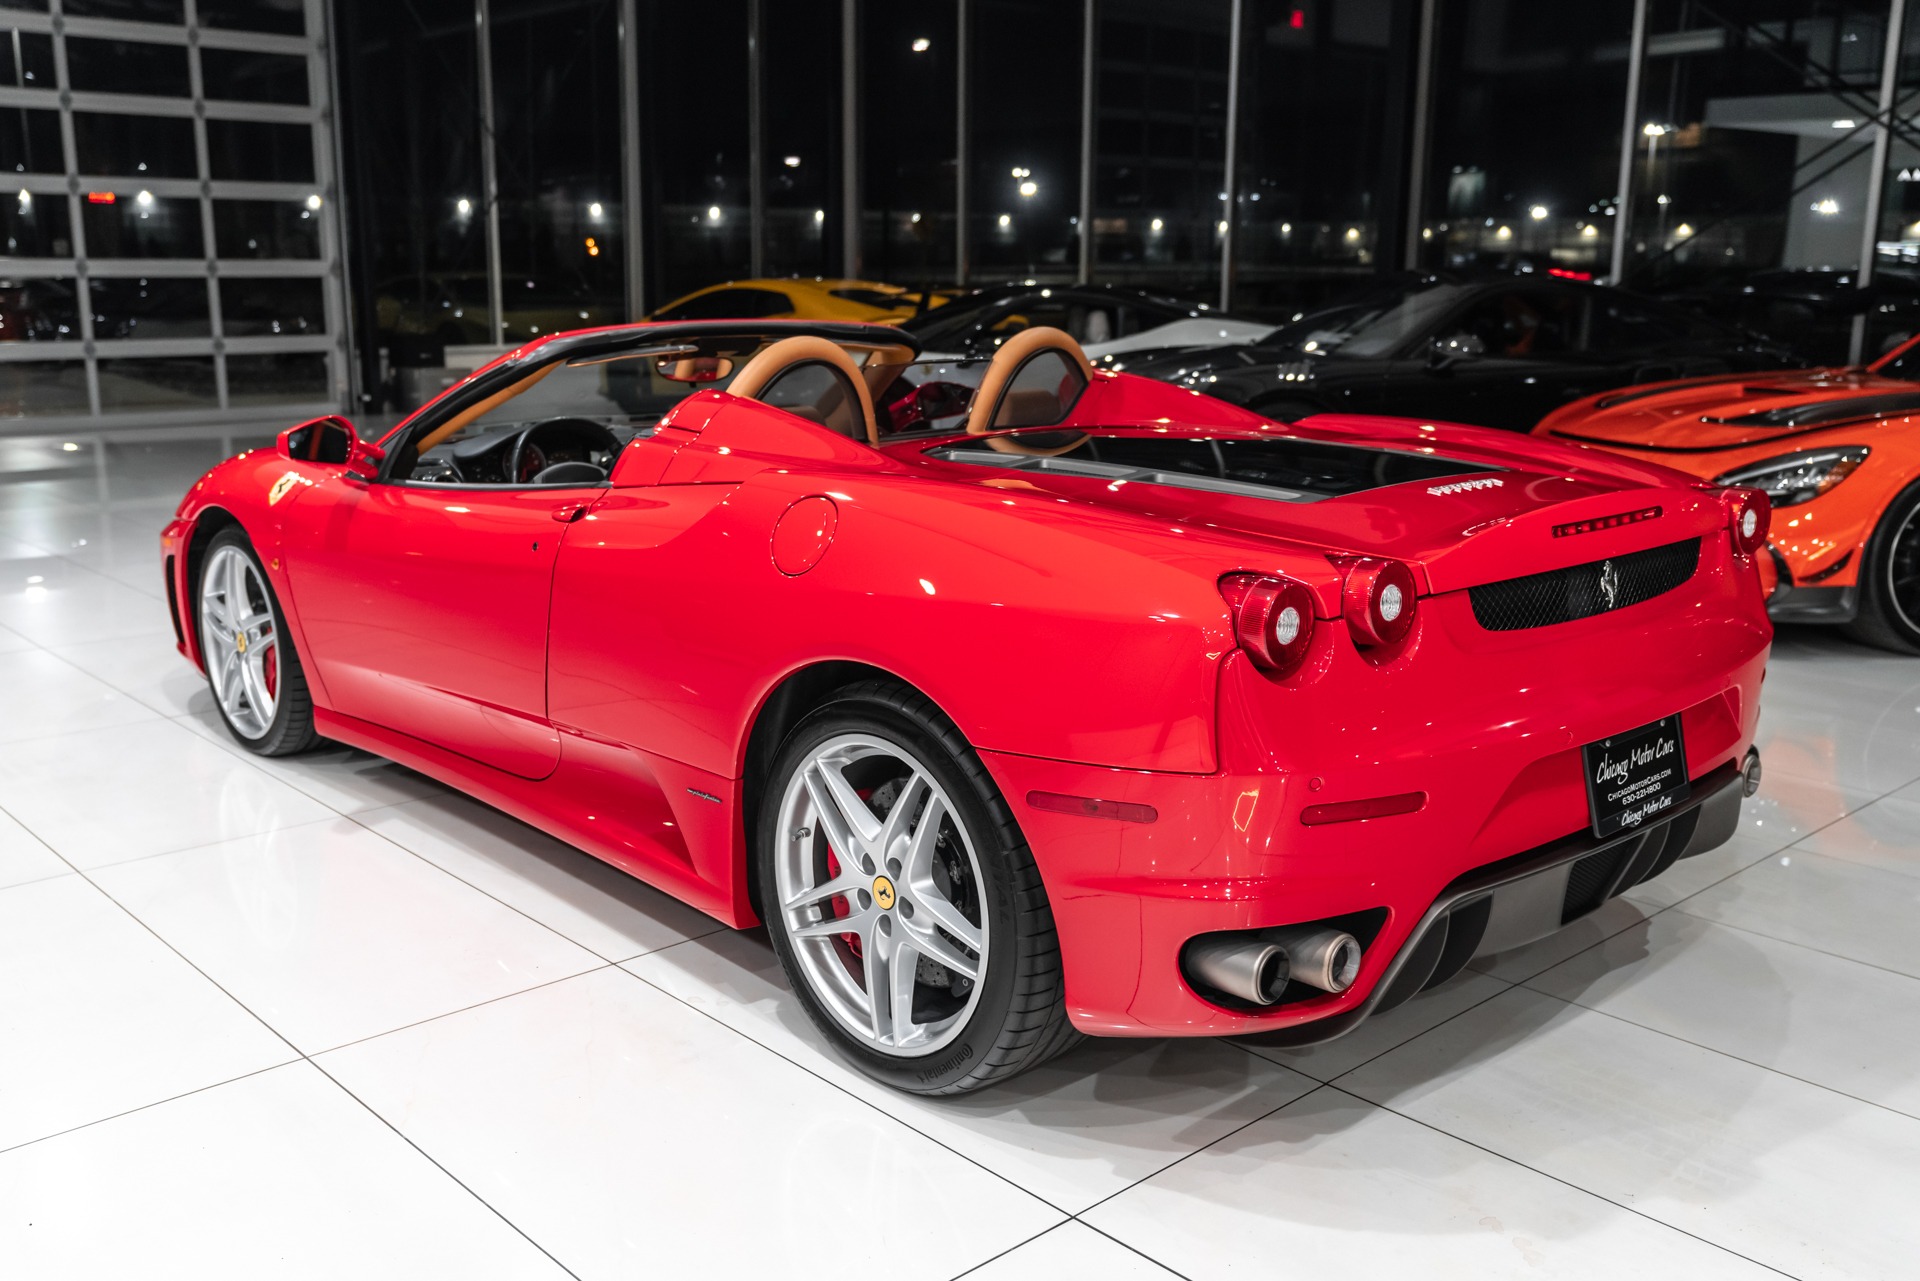 Used-2007-Ferrari-F430-Spider-Gated-6-Speed-Manual-Conversion-Done-by-EAG-Just-Serviced